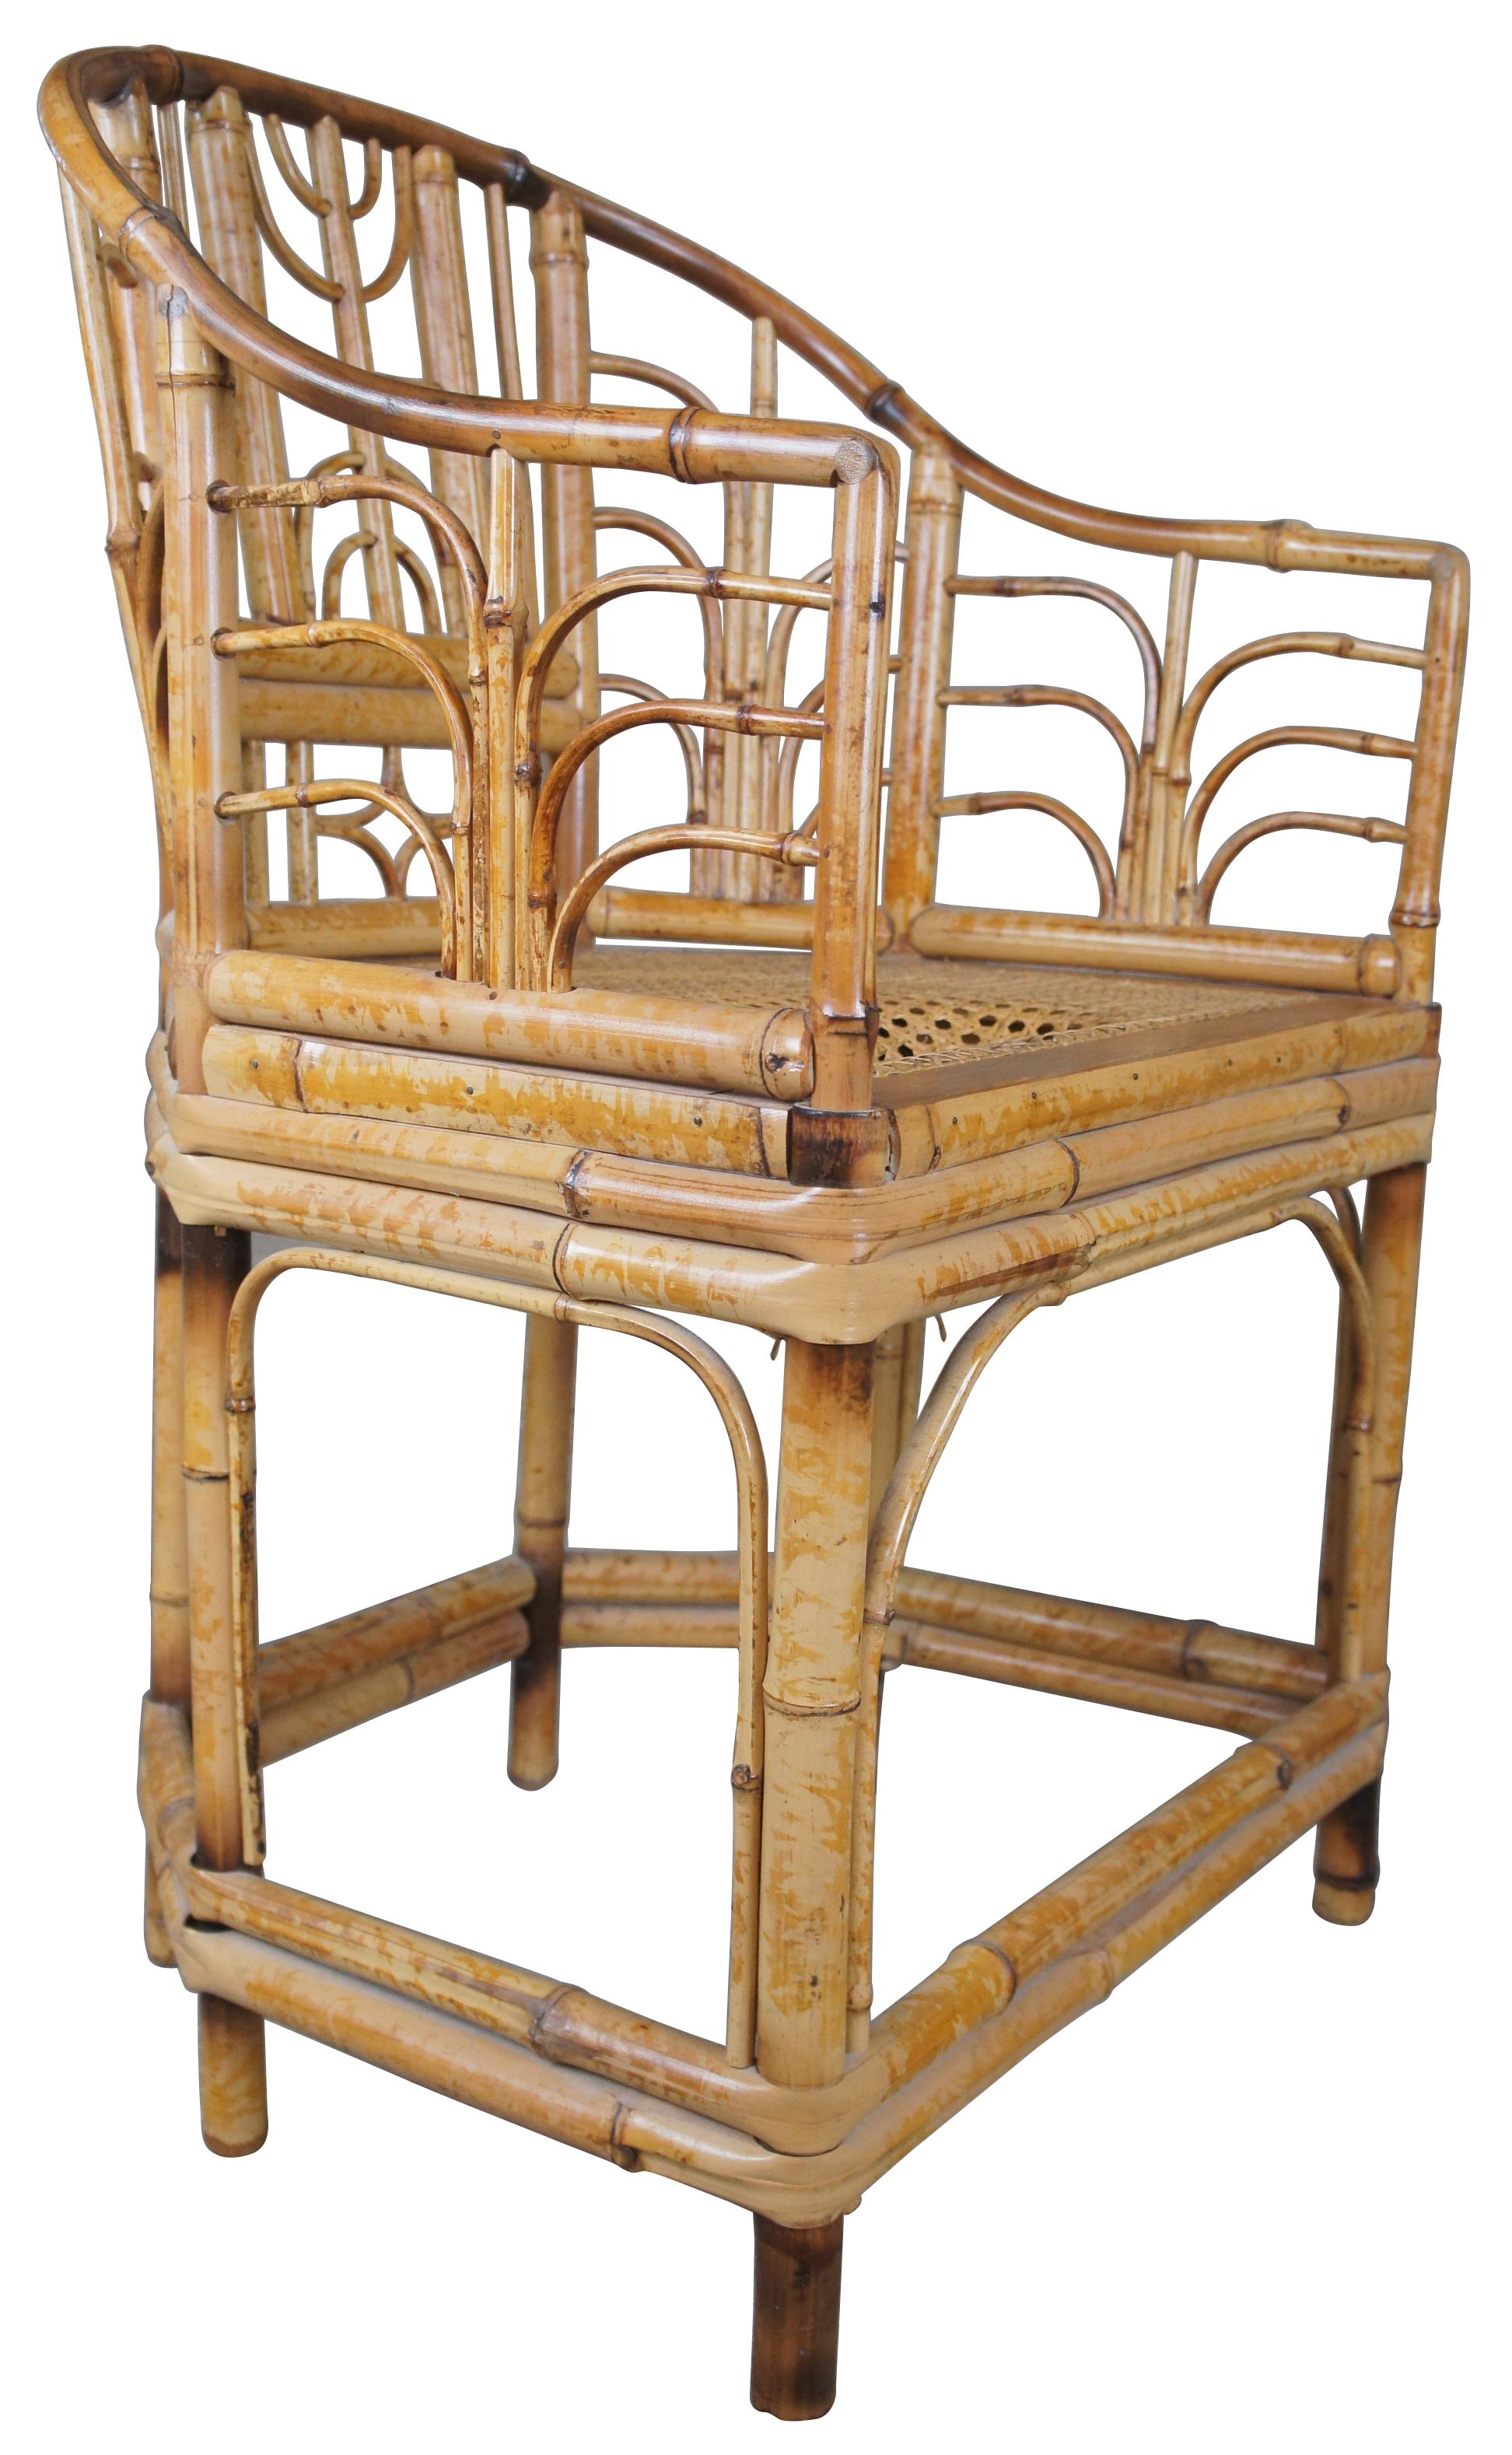 Chinese Chippendale style arm chair, circa 1960s. Made from bamboo with horseshoe back, bentwood design and caned seat.
 